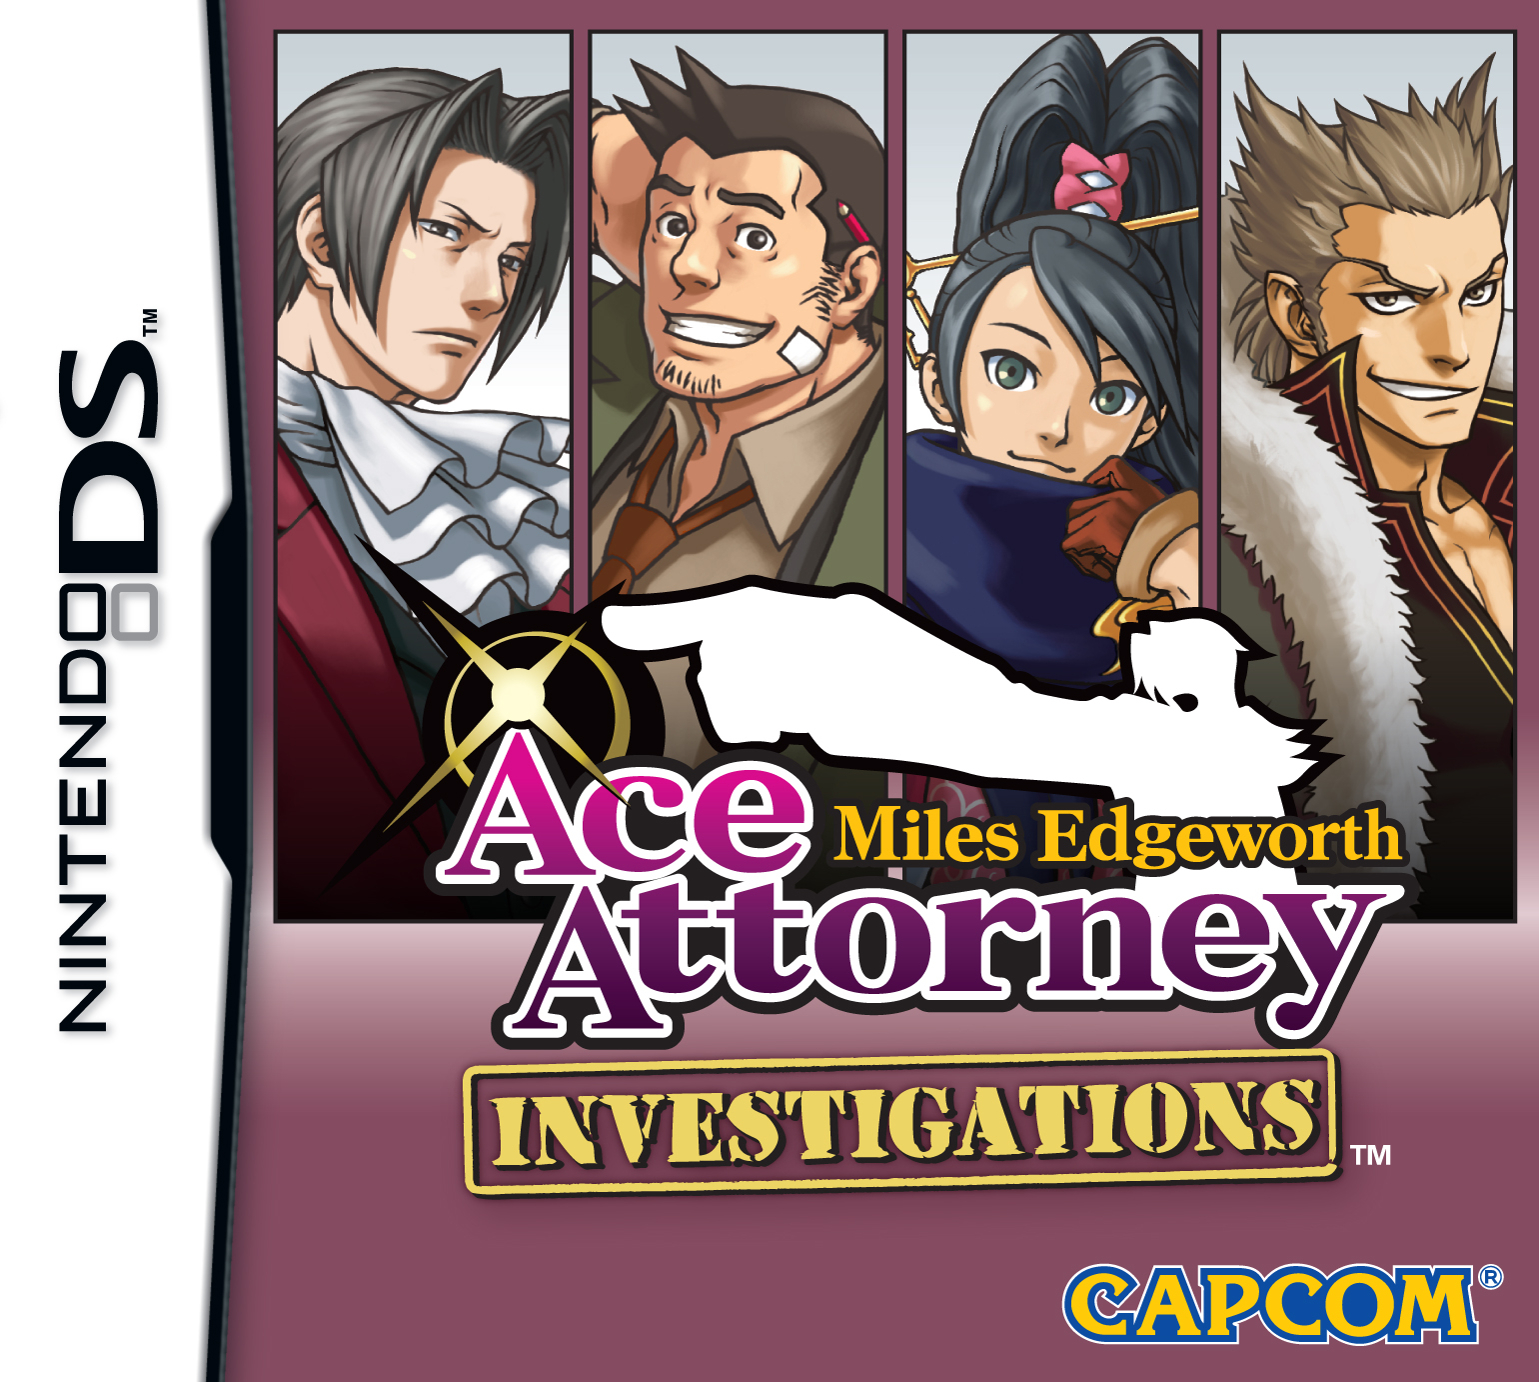 Ace Attorney Investigations: Miles Edgeworth [NDS]